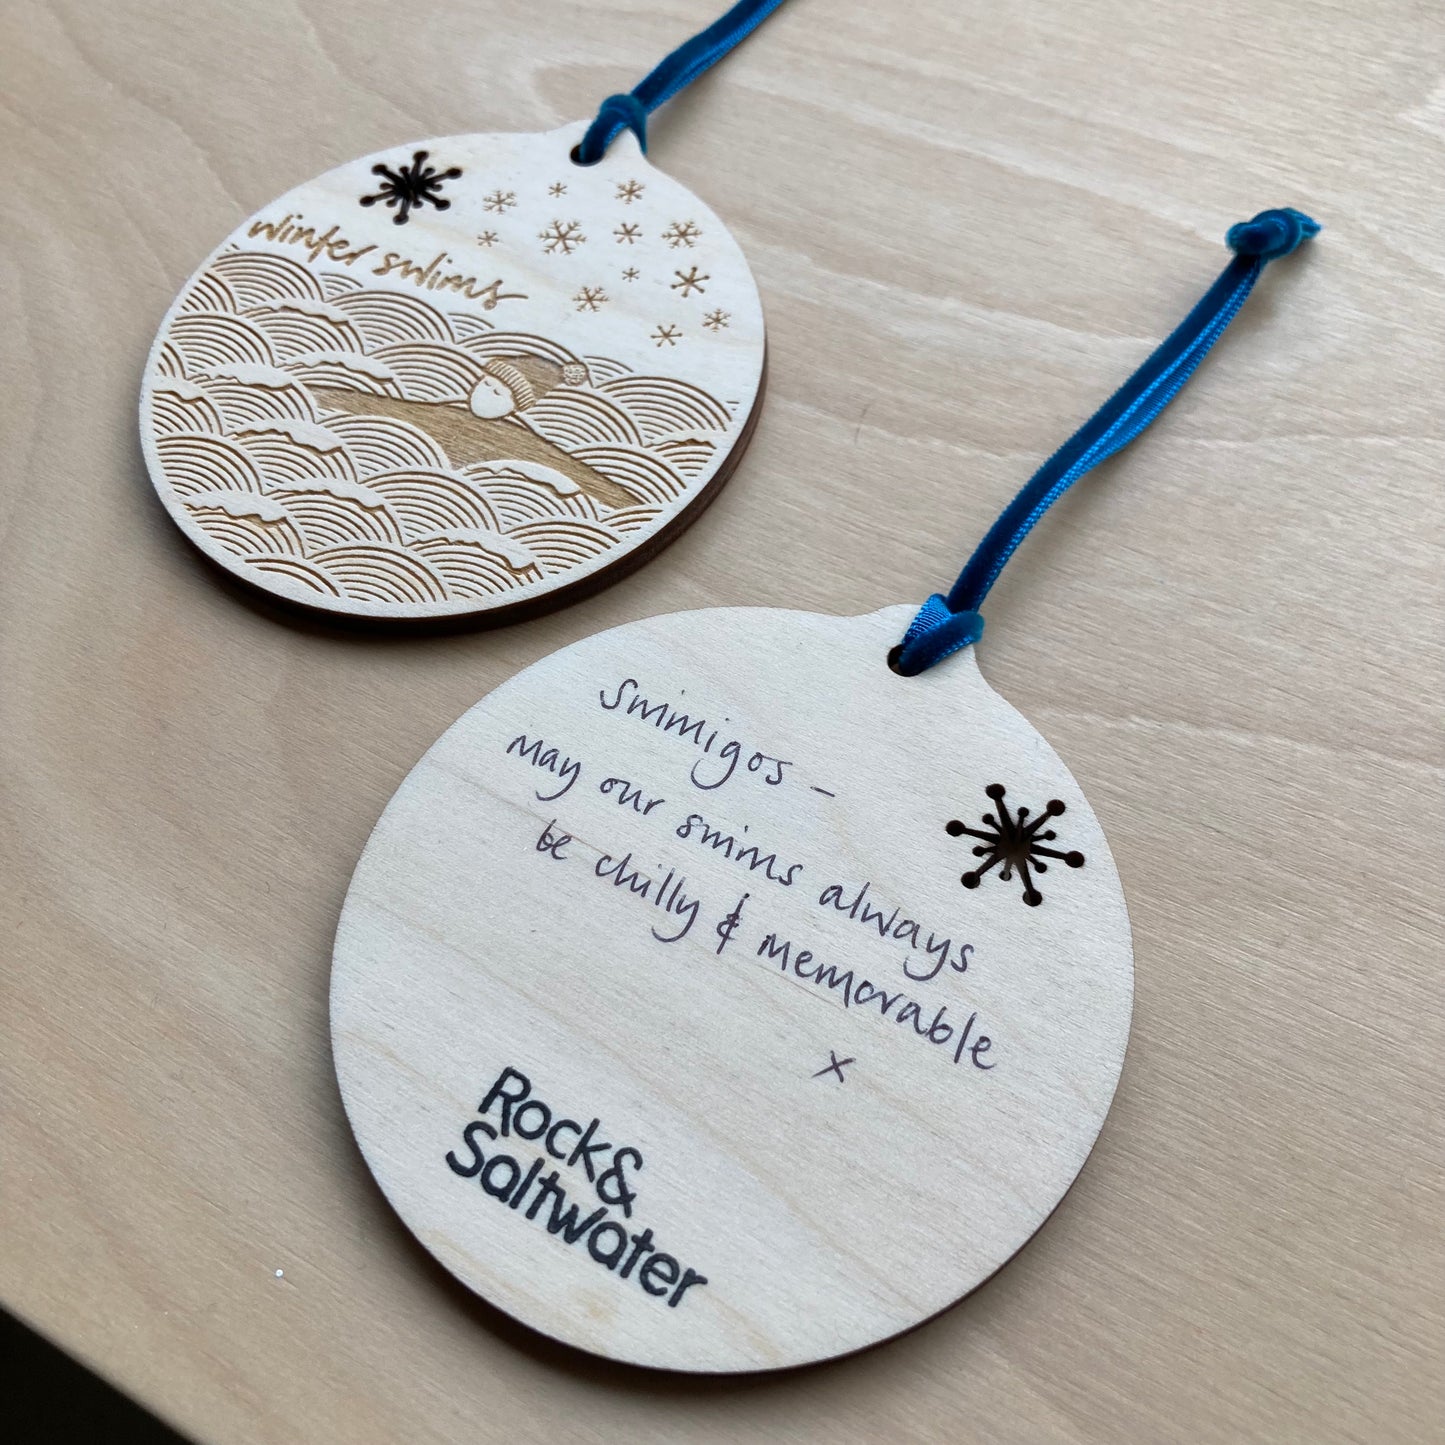 Winter swims laser etched bauble